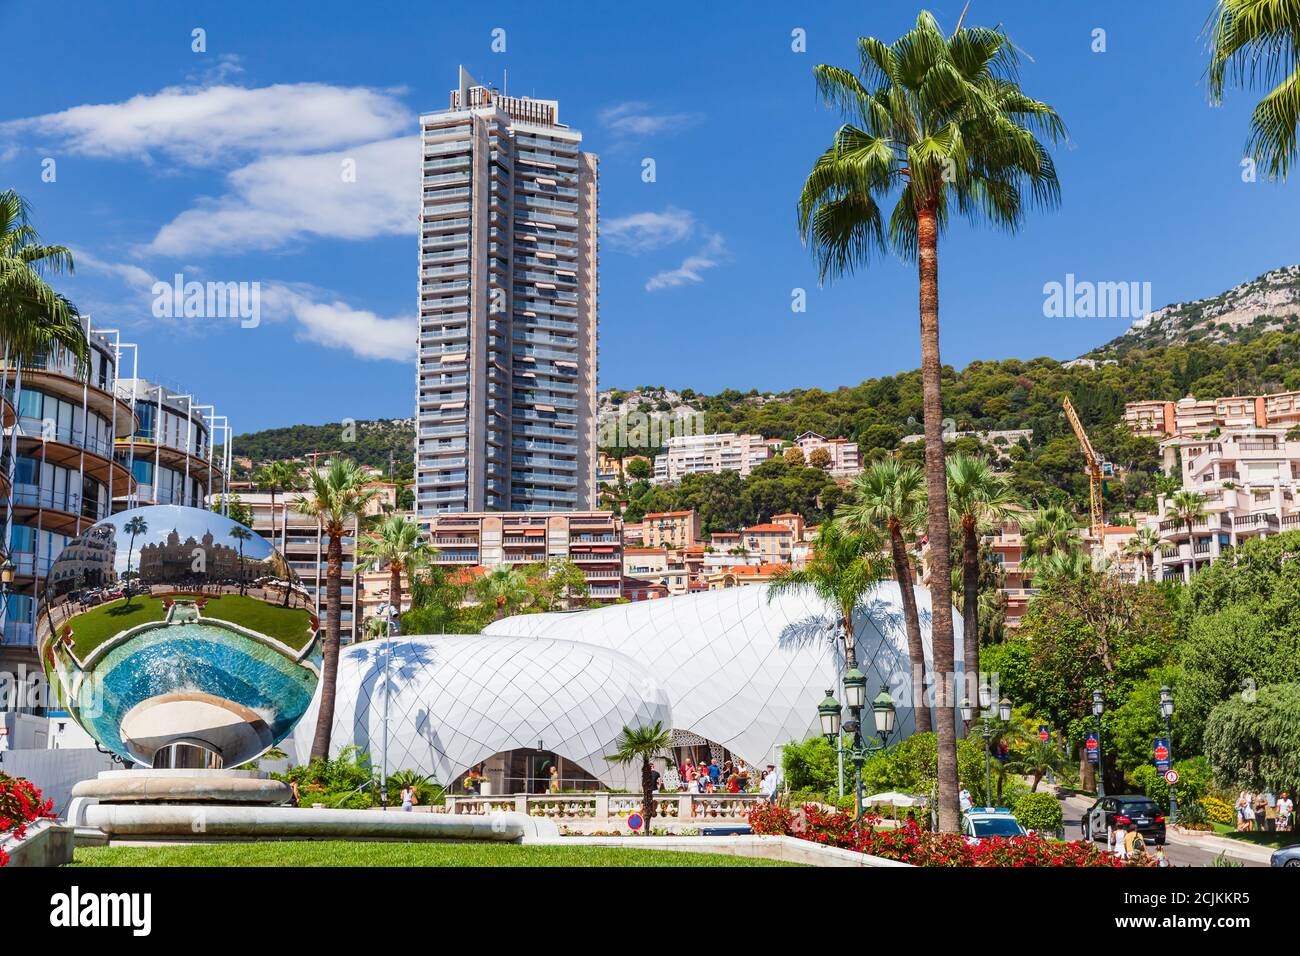 Monte Carlo, Monaco - August 15, 2018: Place du Casino at sunny day, tourists walk the street Stock Photo